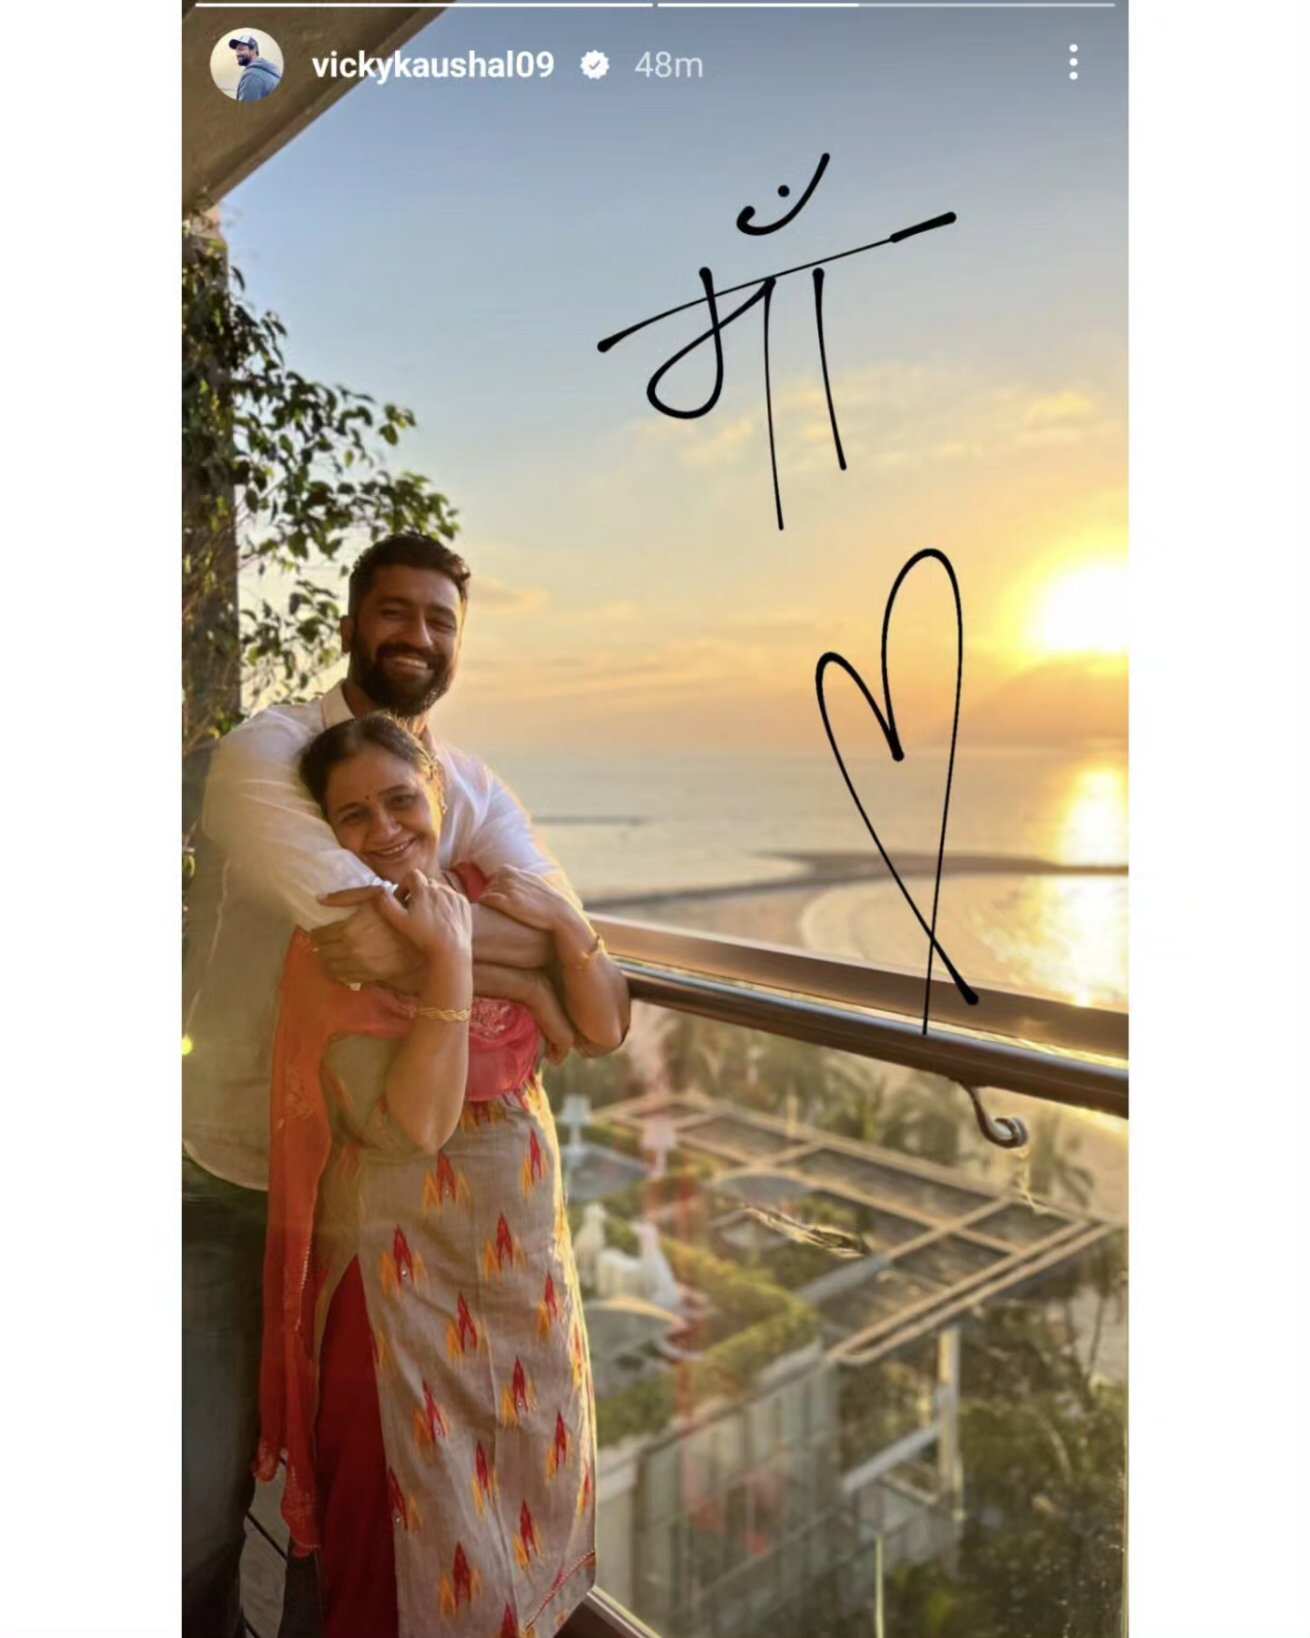 Vicky Kaushal's Instagram Story is all about love